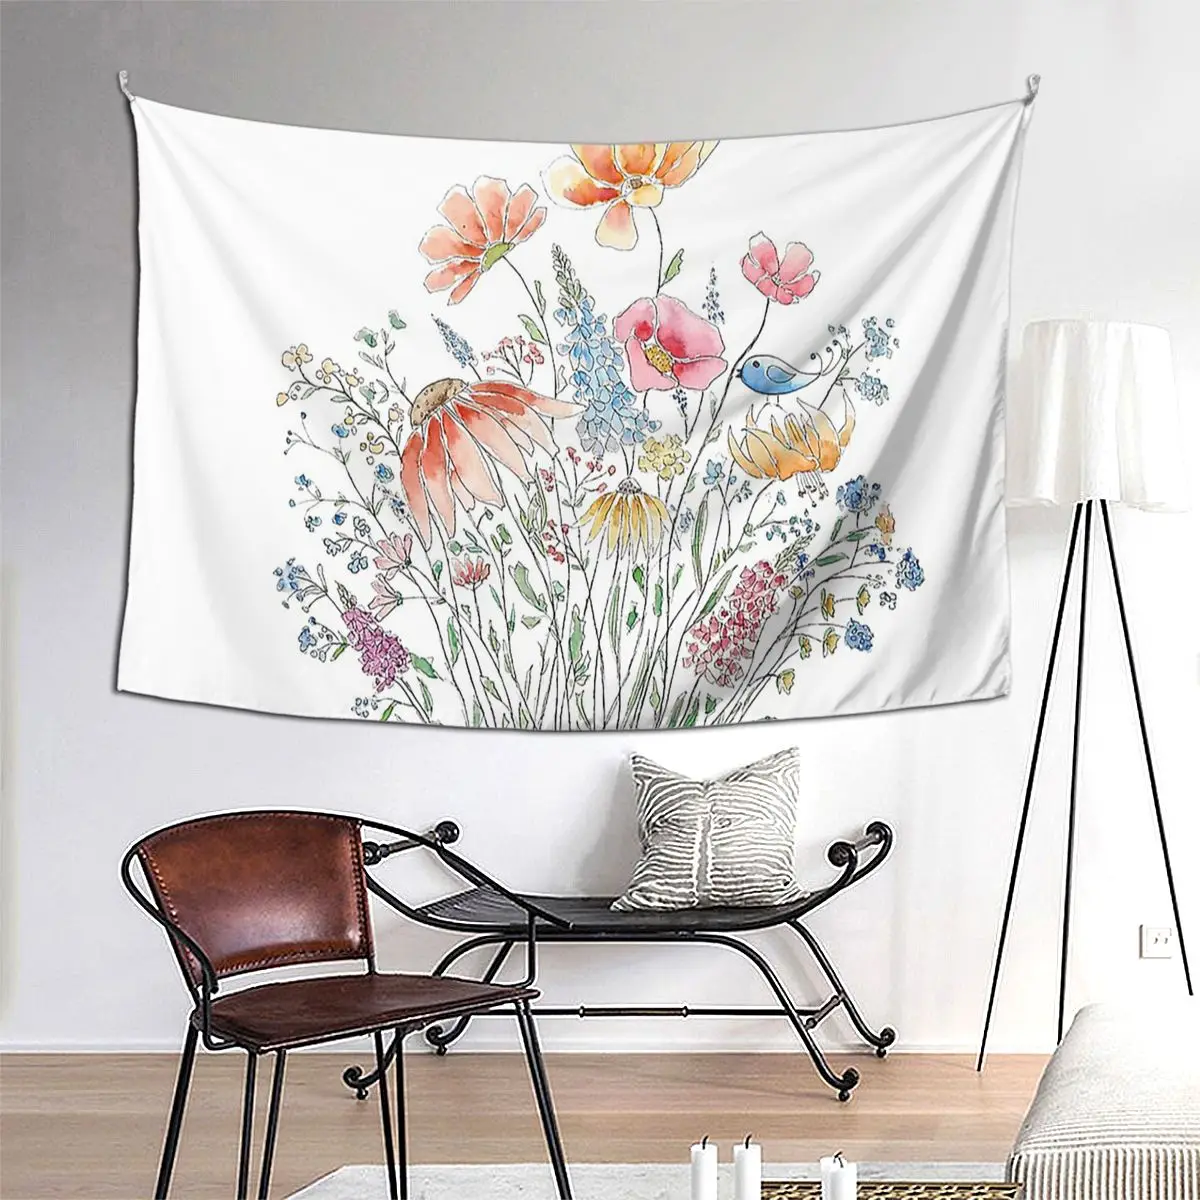 

Wild Flower Bouquet And Blue Bird Line And Watercolor Tapestry Wall Hanging Home Decor Tapestries for Living Room Bedroom Dorm